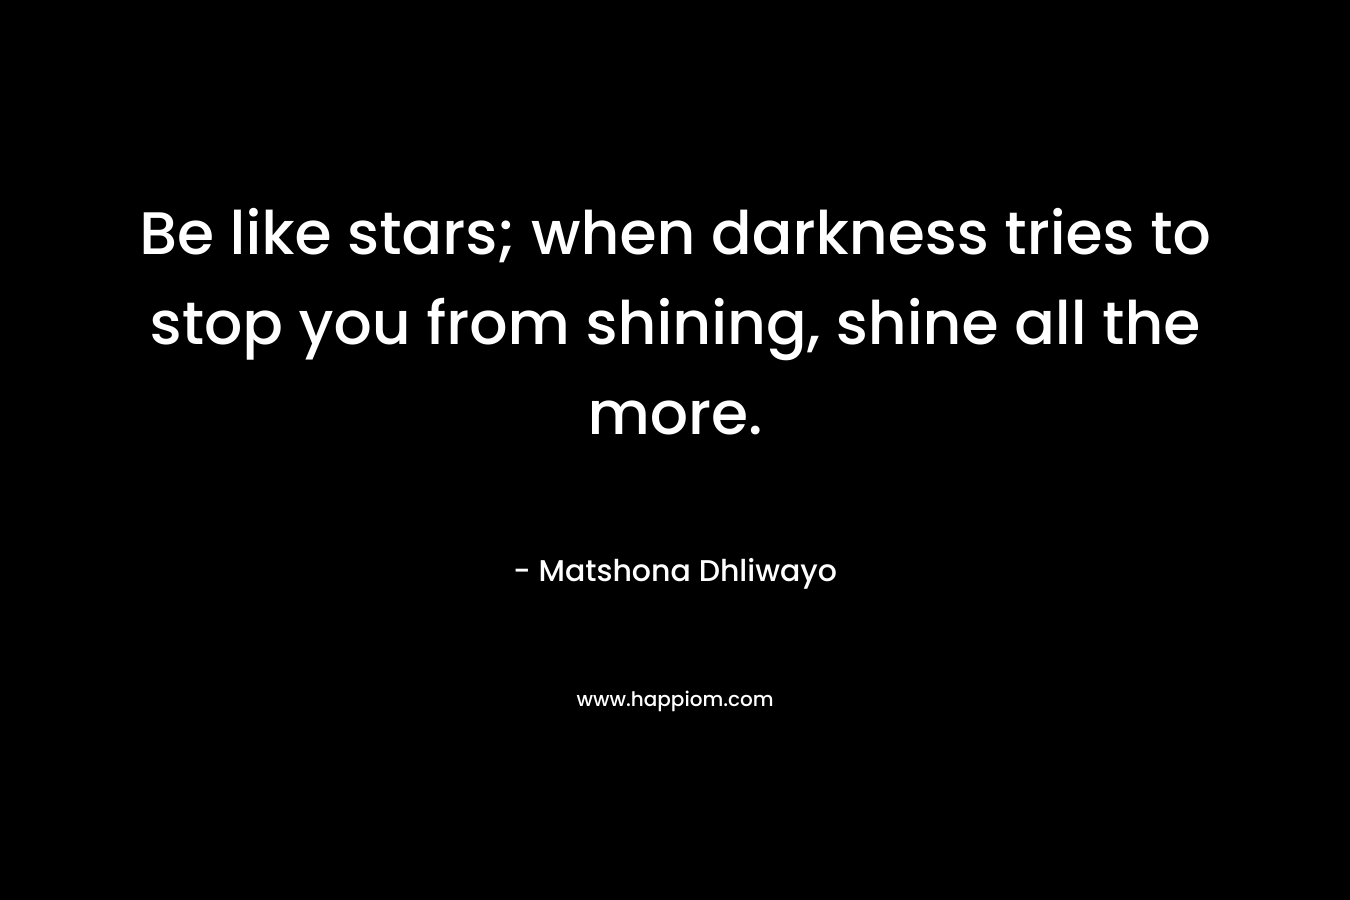 Be like stars; when darkness tries to stop you from shining, shine all the more.